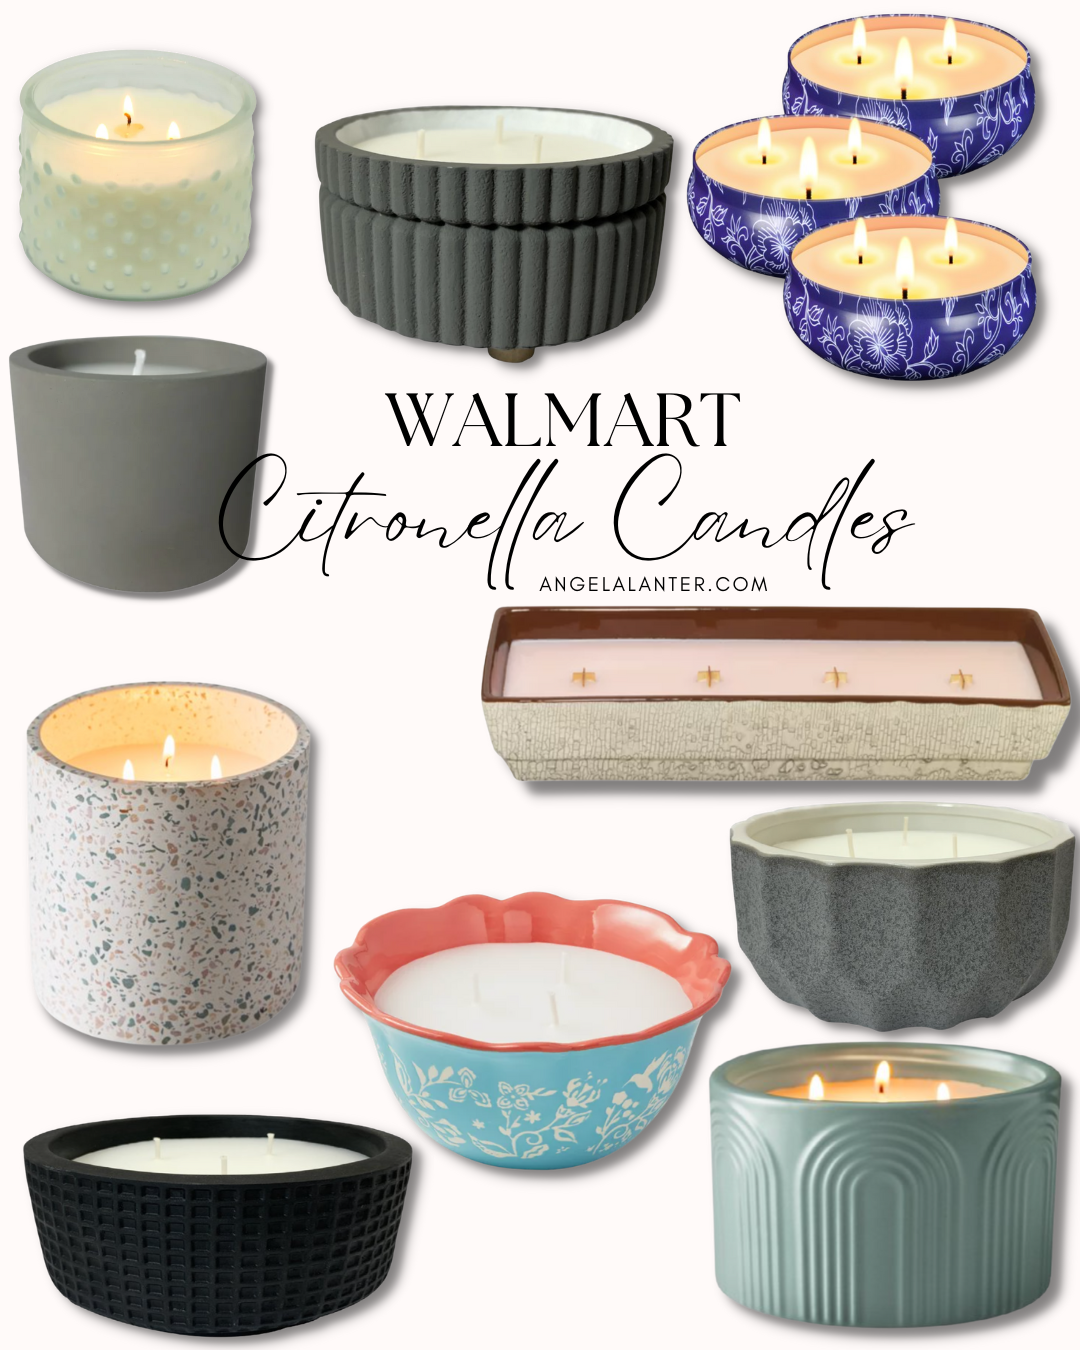 walmart citronella bucket candles for summer bug repelling candle mosquito resistant by lifestyle blogger angela lanter